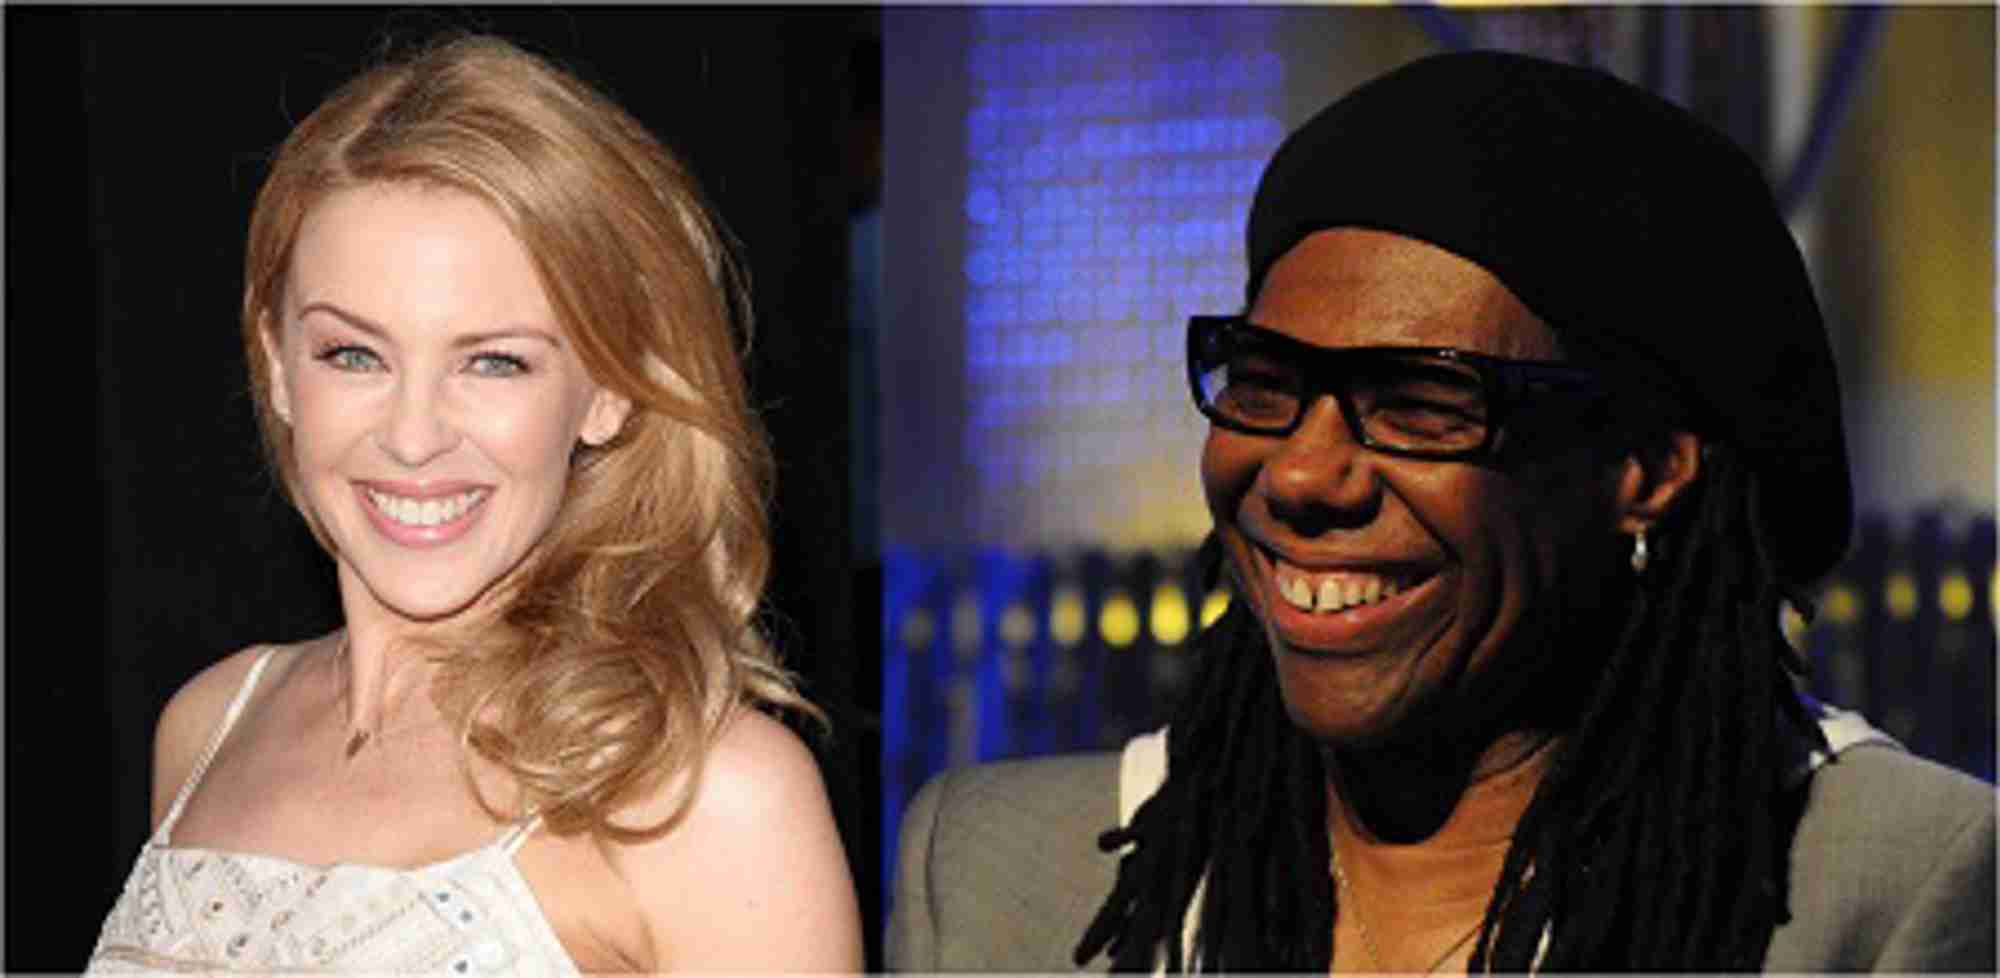 Pop legends Kylie and Nile Rodgers are both cancer survivors. Credits: Shutterstock (Kylie); Wikimedia Commons/Joe Mabel (Nile)